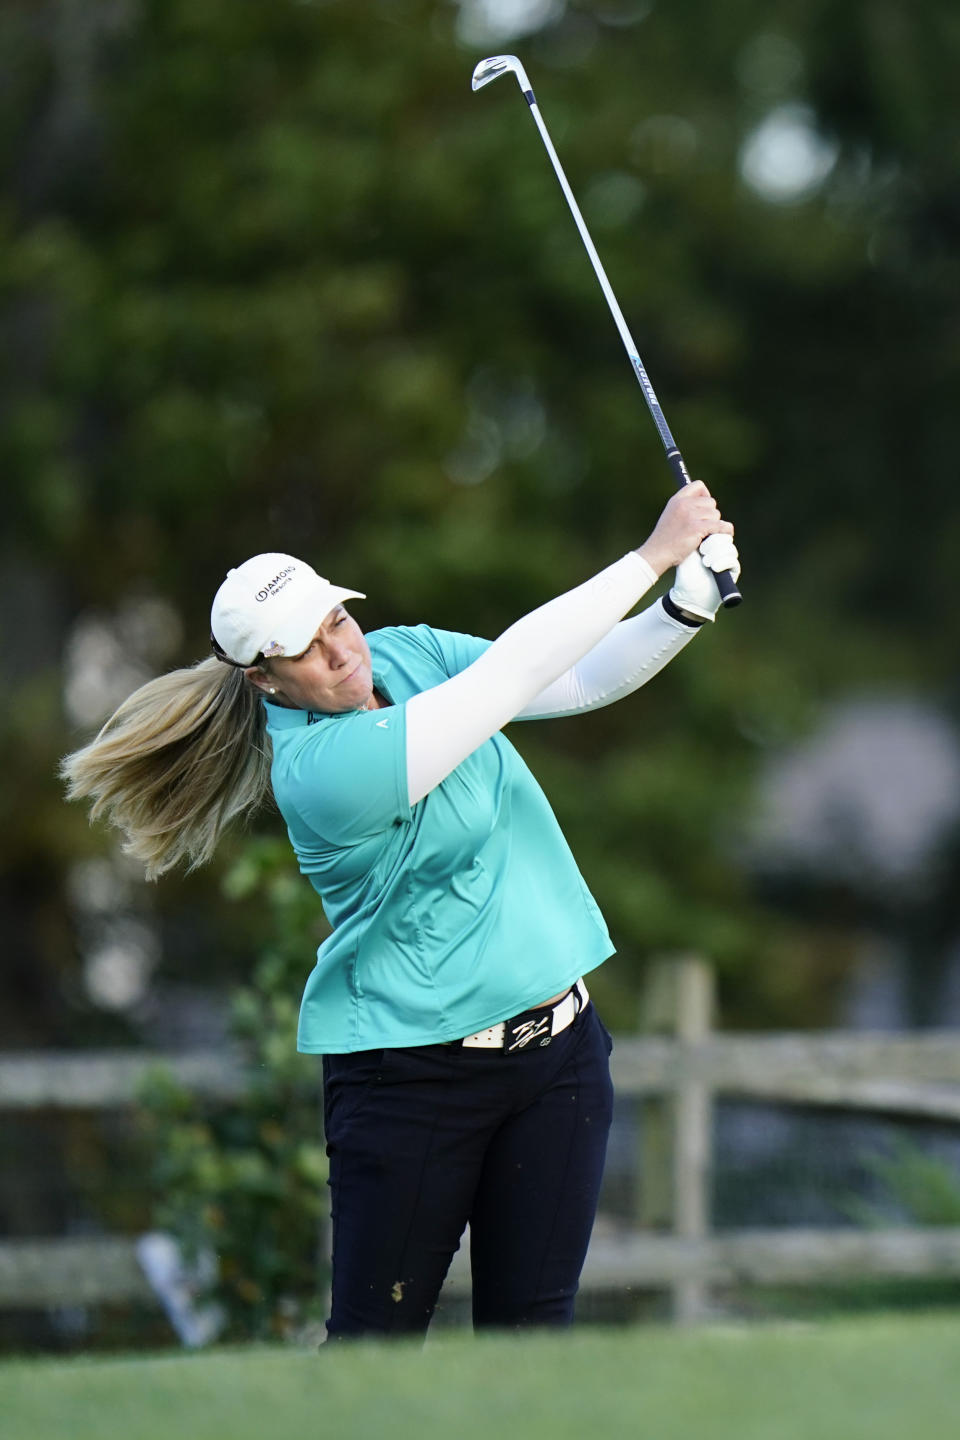 Brittany Lincicome watches her tee shot on the fifth hole during the first round of the KPMG Women's PGA Championship golf tournament at the Aronimink Golf Club, Thursday, Oct. 8, 2020, in Newtown Square, Pa. (AP Photo/Matt Slocum)